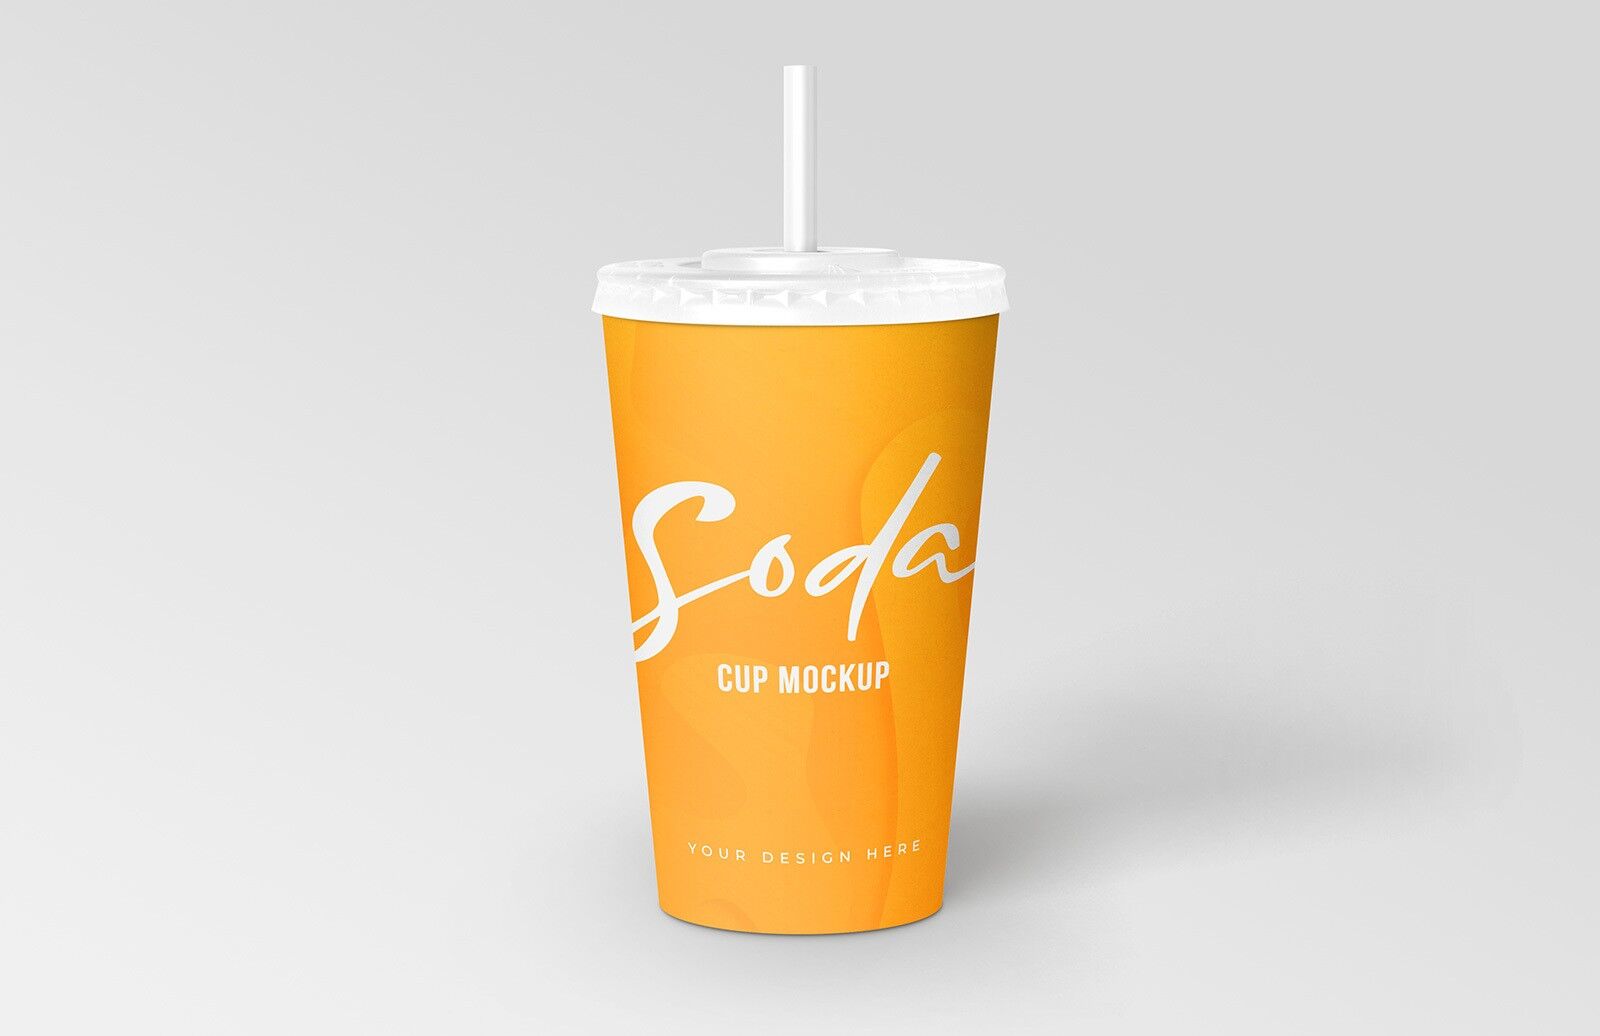 https://resourceboy.com/wp-content/uploads/2021/10/realistic-mockup-of-a-soda-cup-with-or-without-straw-2.jpg